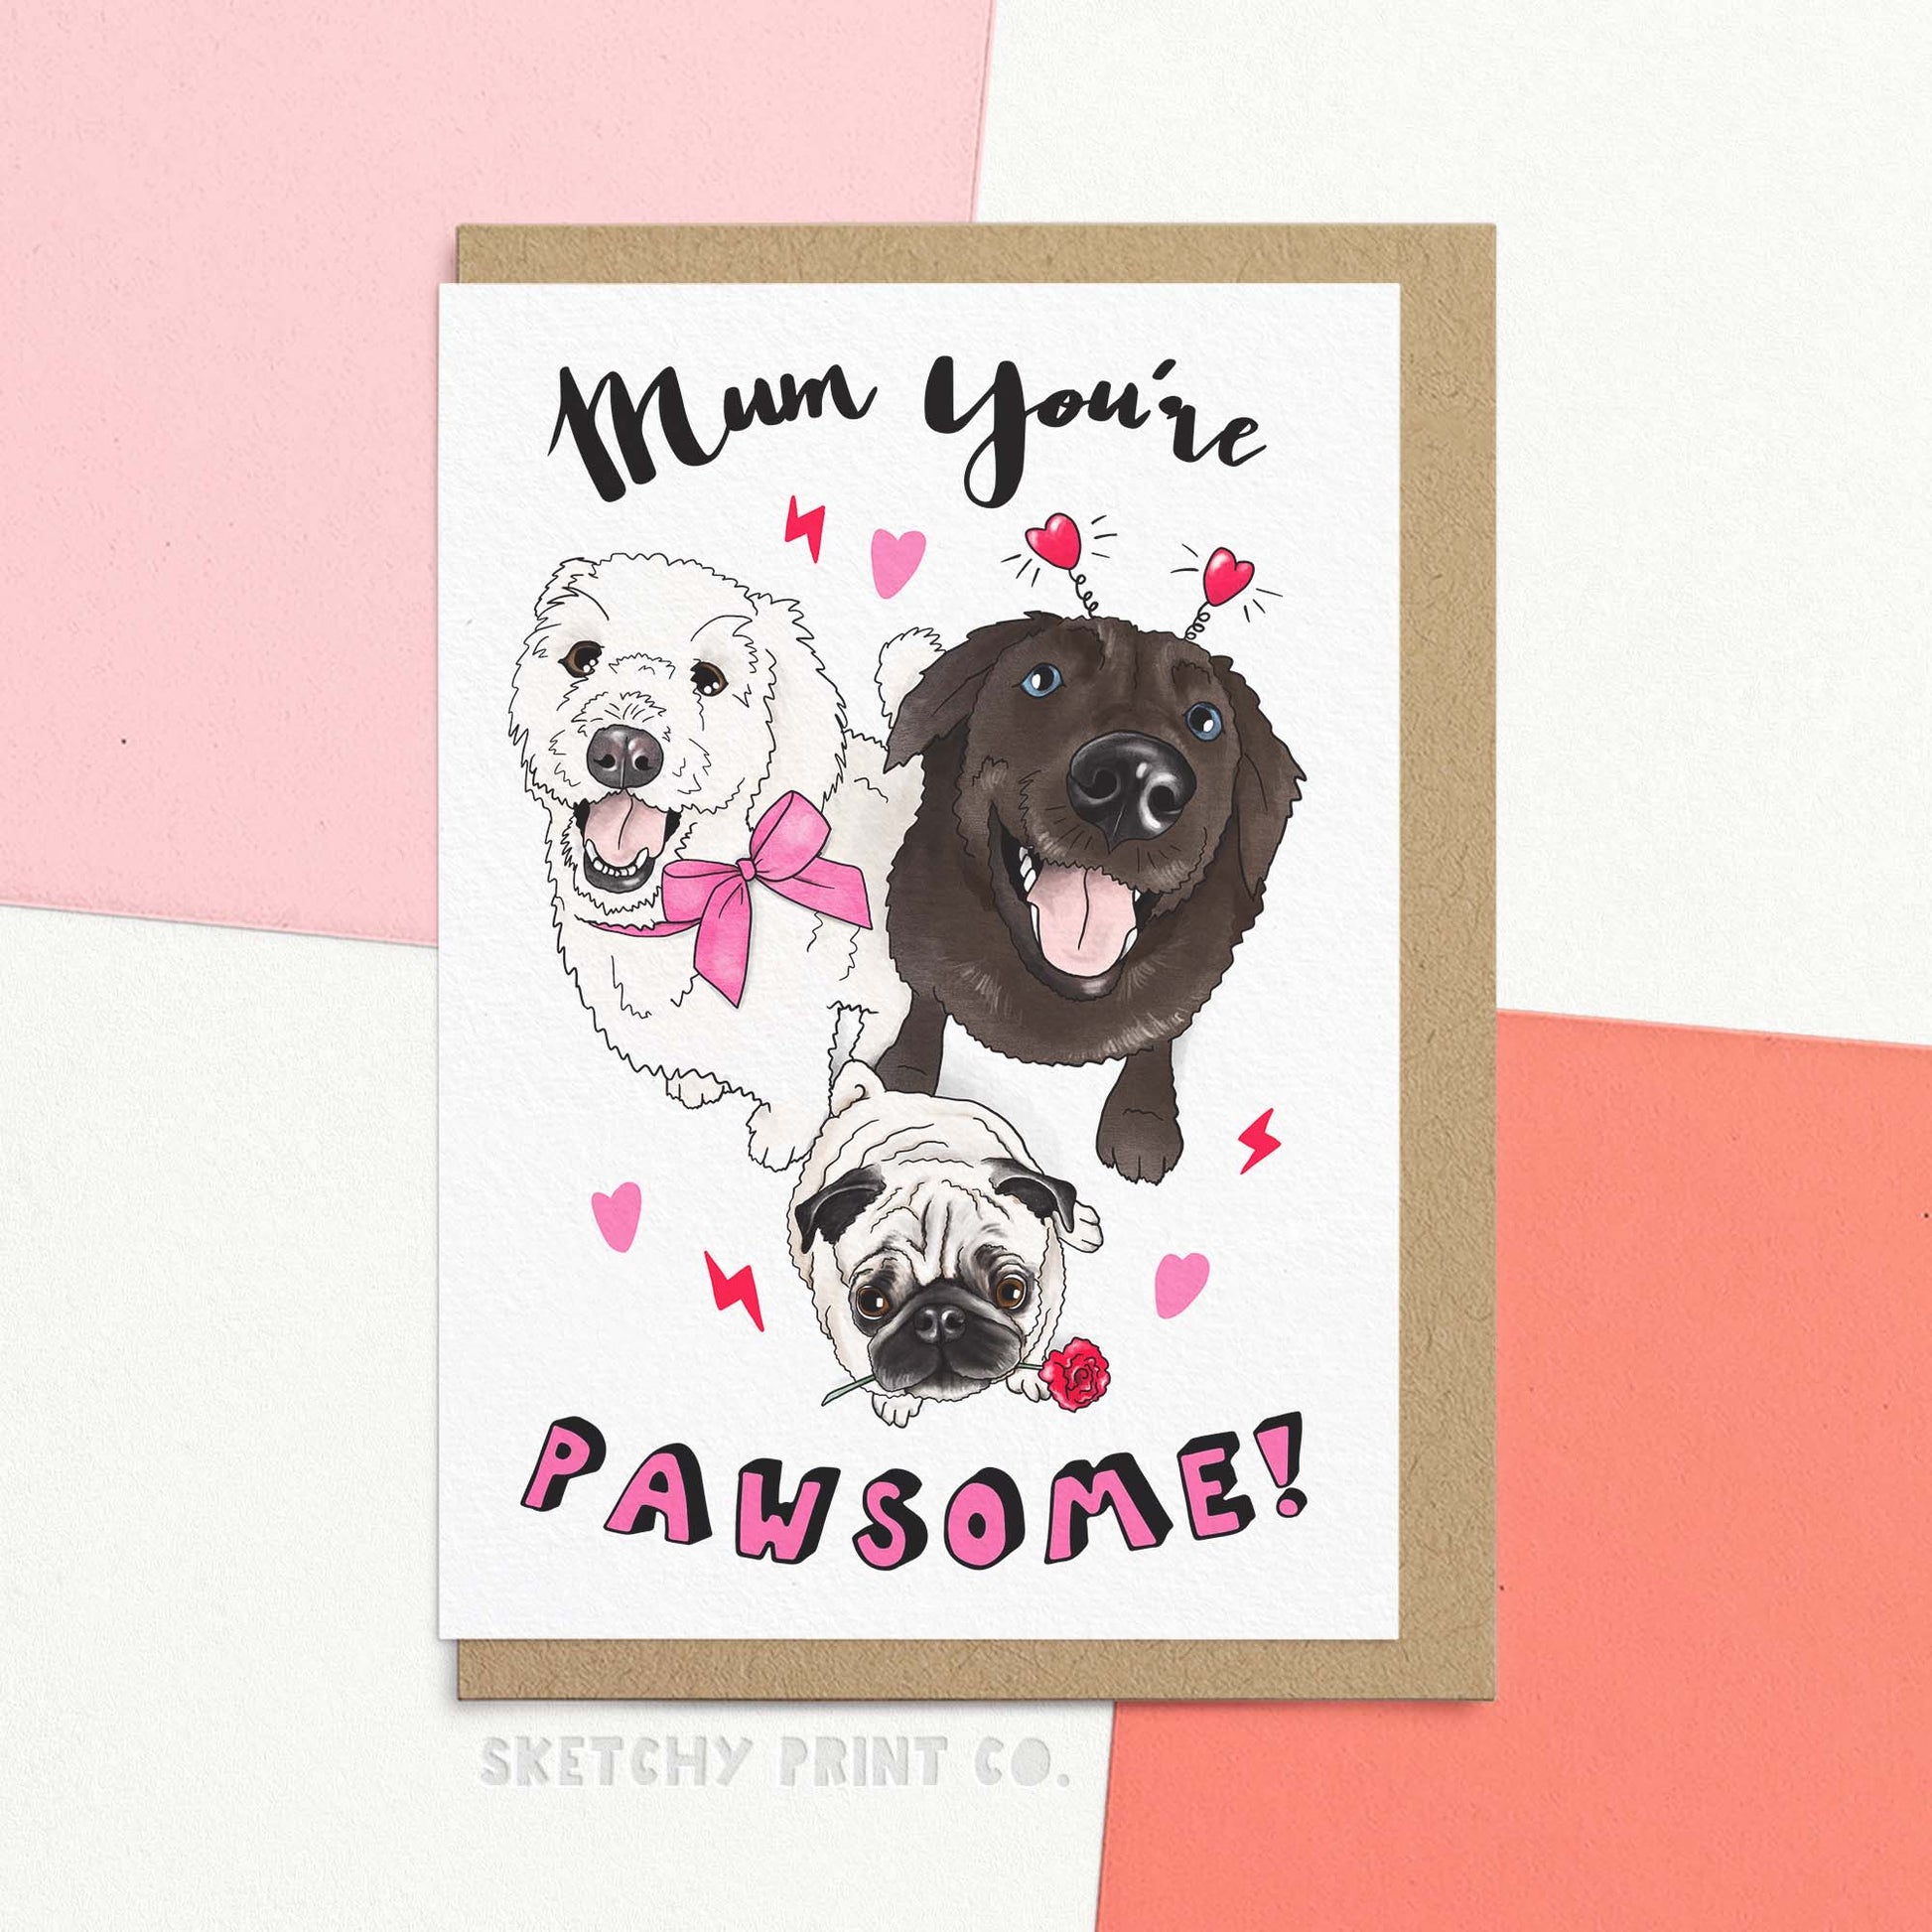 Funny mother's day card for dog mum. mother's day ideas for mom. Card Thea reads 'Mum you're pawsome!' with cute illustrations of a pug, a Labrador and a white fluffy dog.